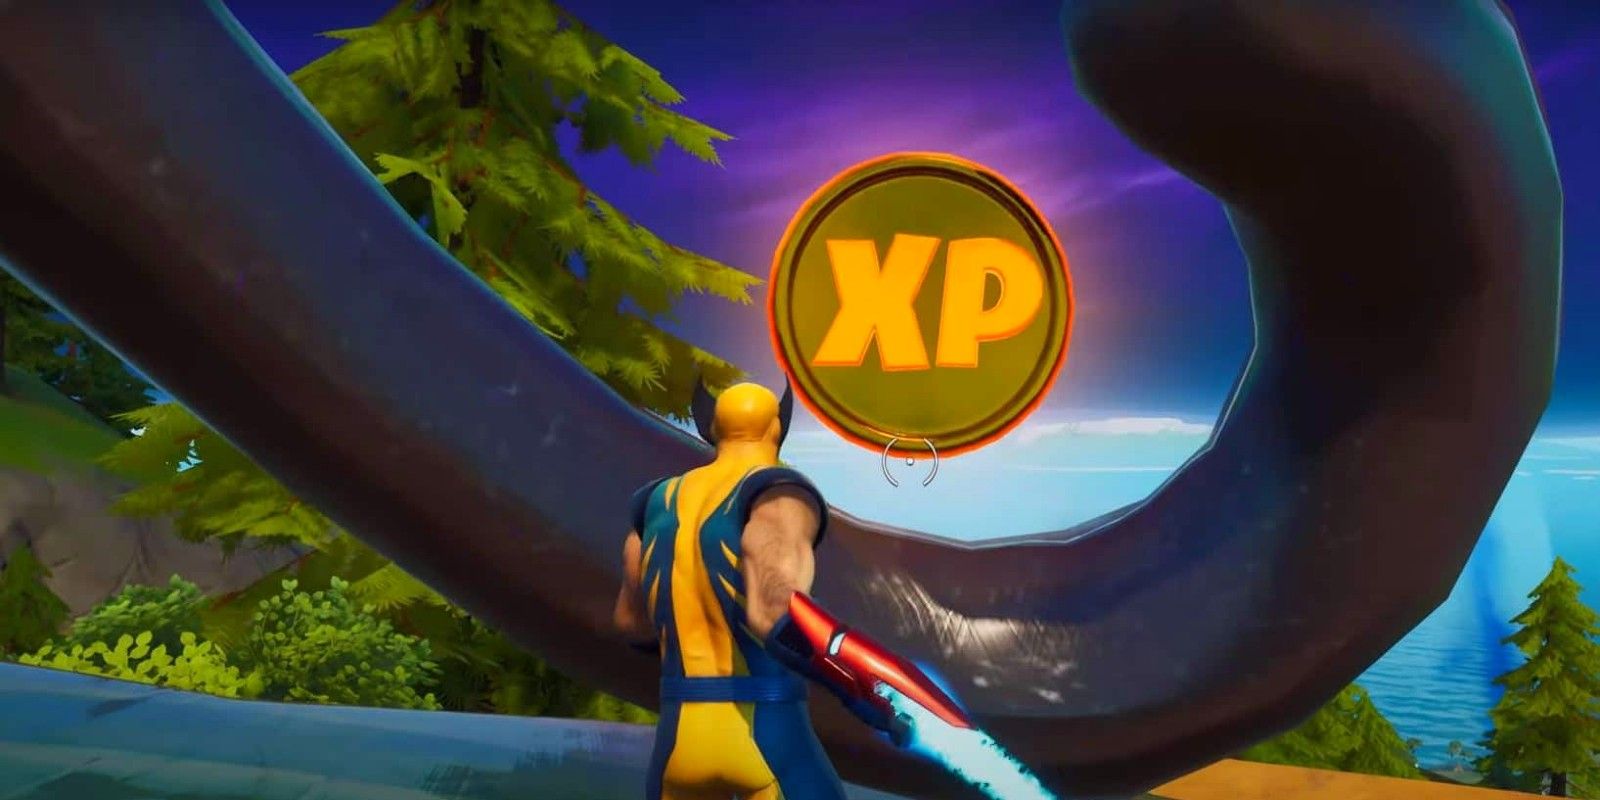 A player finds the Week 8 Gold XP Coin at Panther's Prowl in Fortnite Season 4